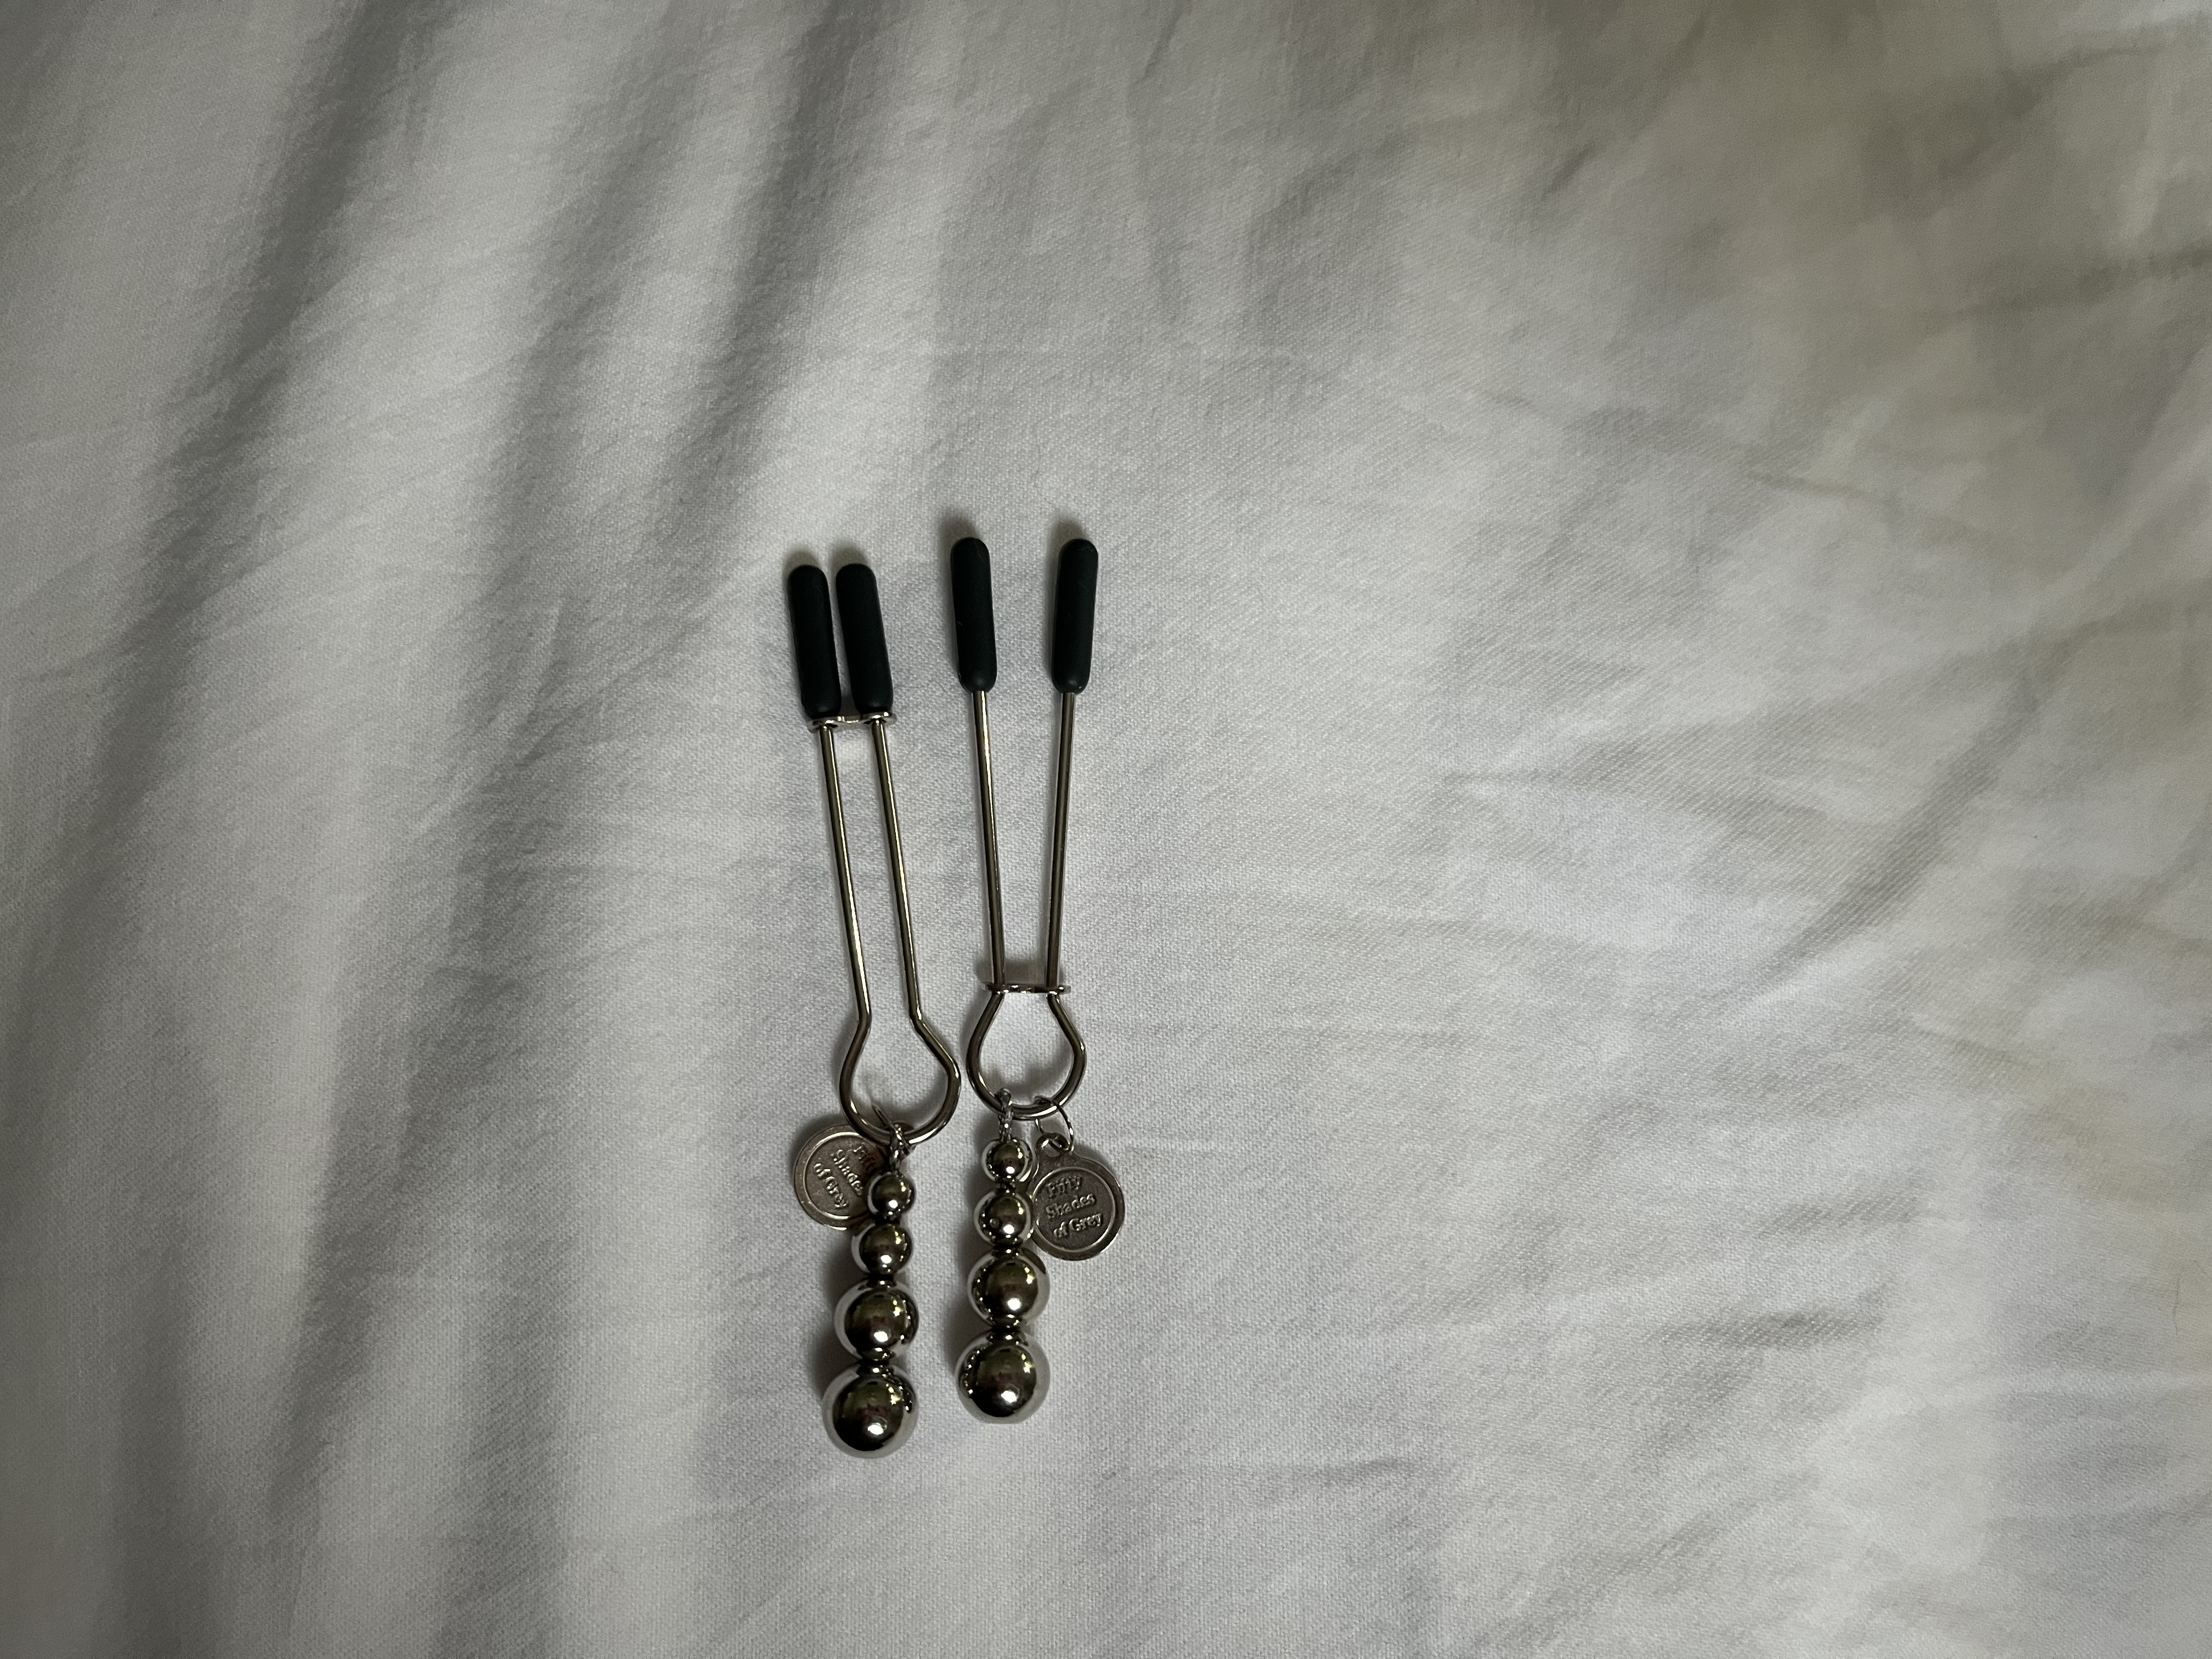 Fifty Shades of Grey Adjustable Nipple Clamps. Slide 9